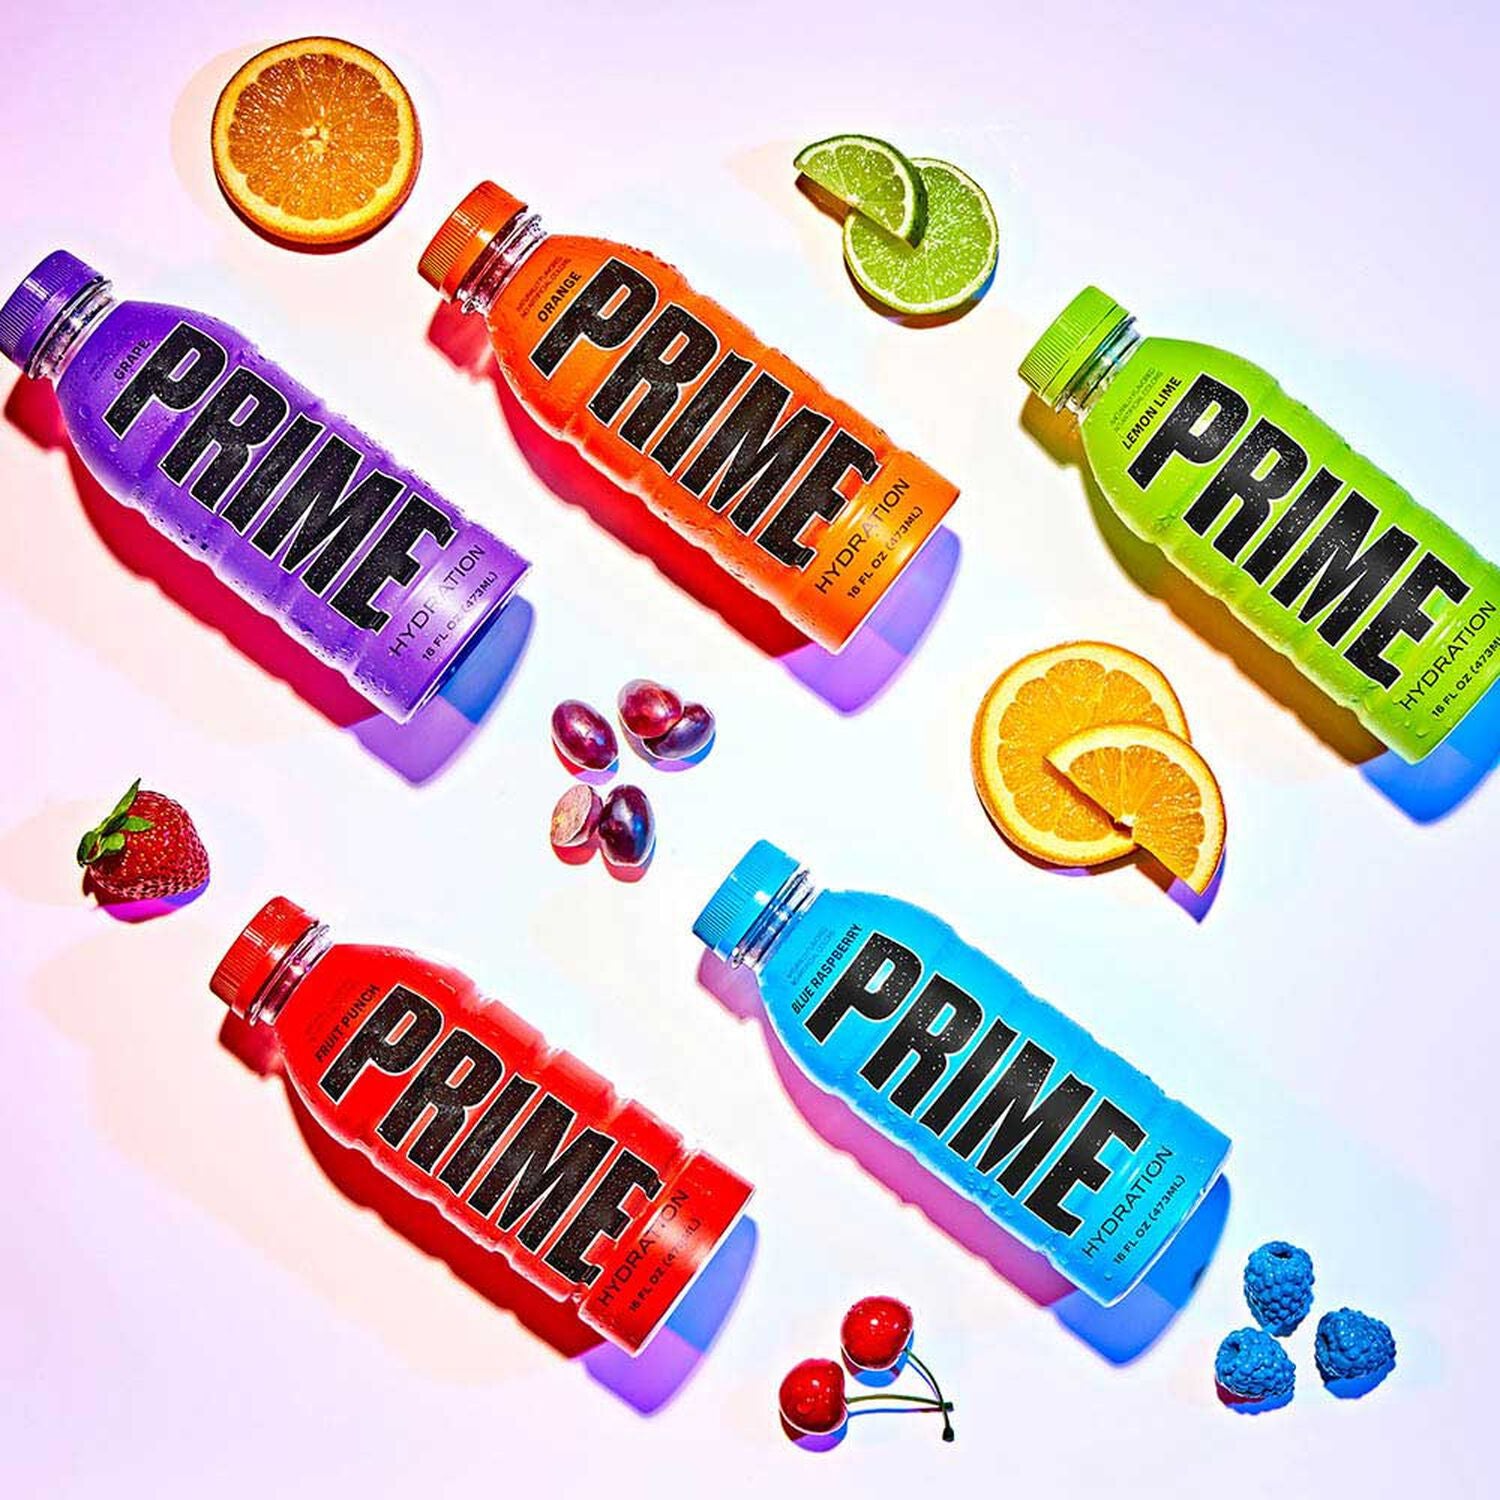 5 flavours of Prime Hydration Drink